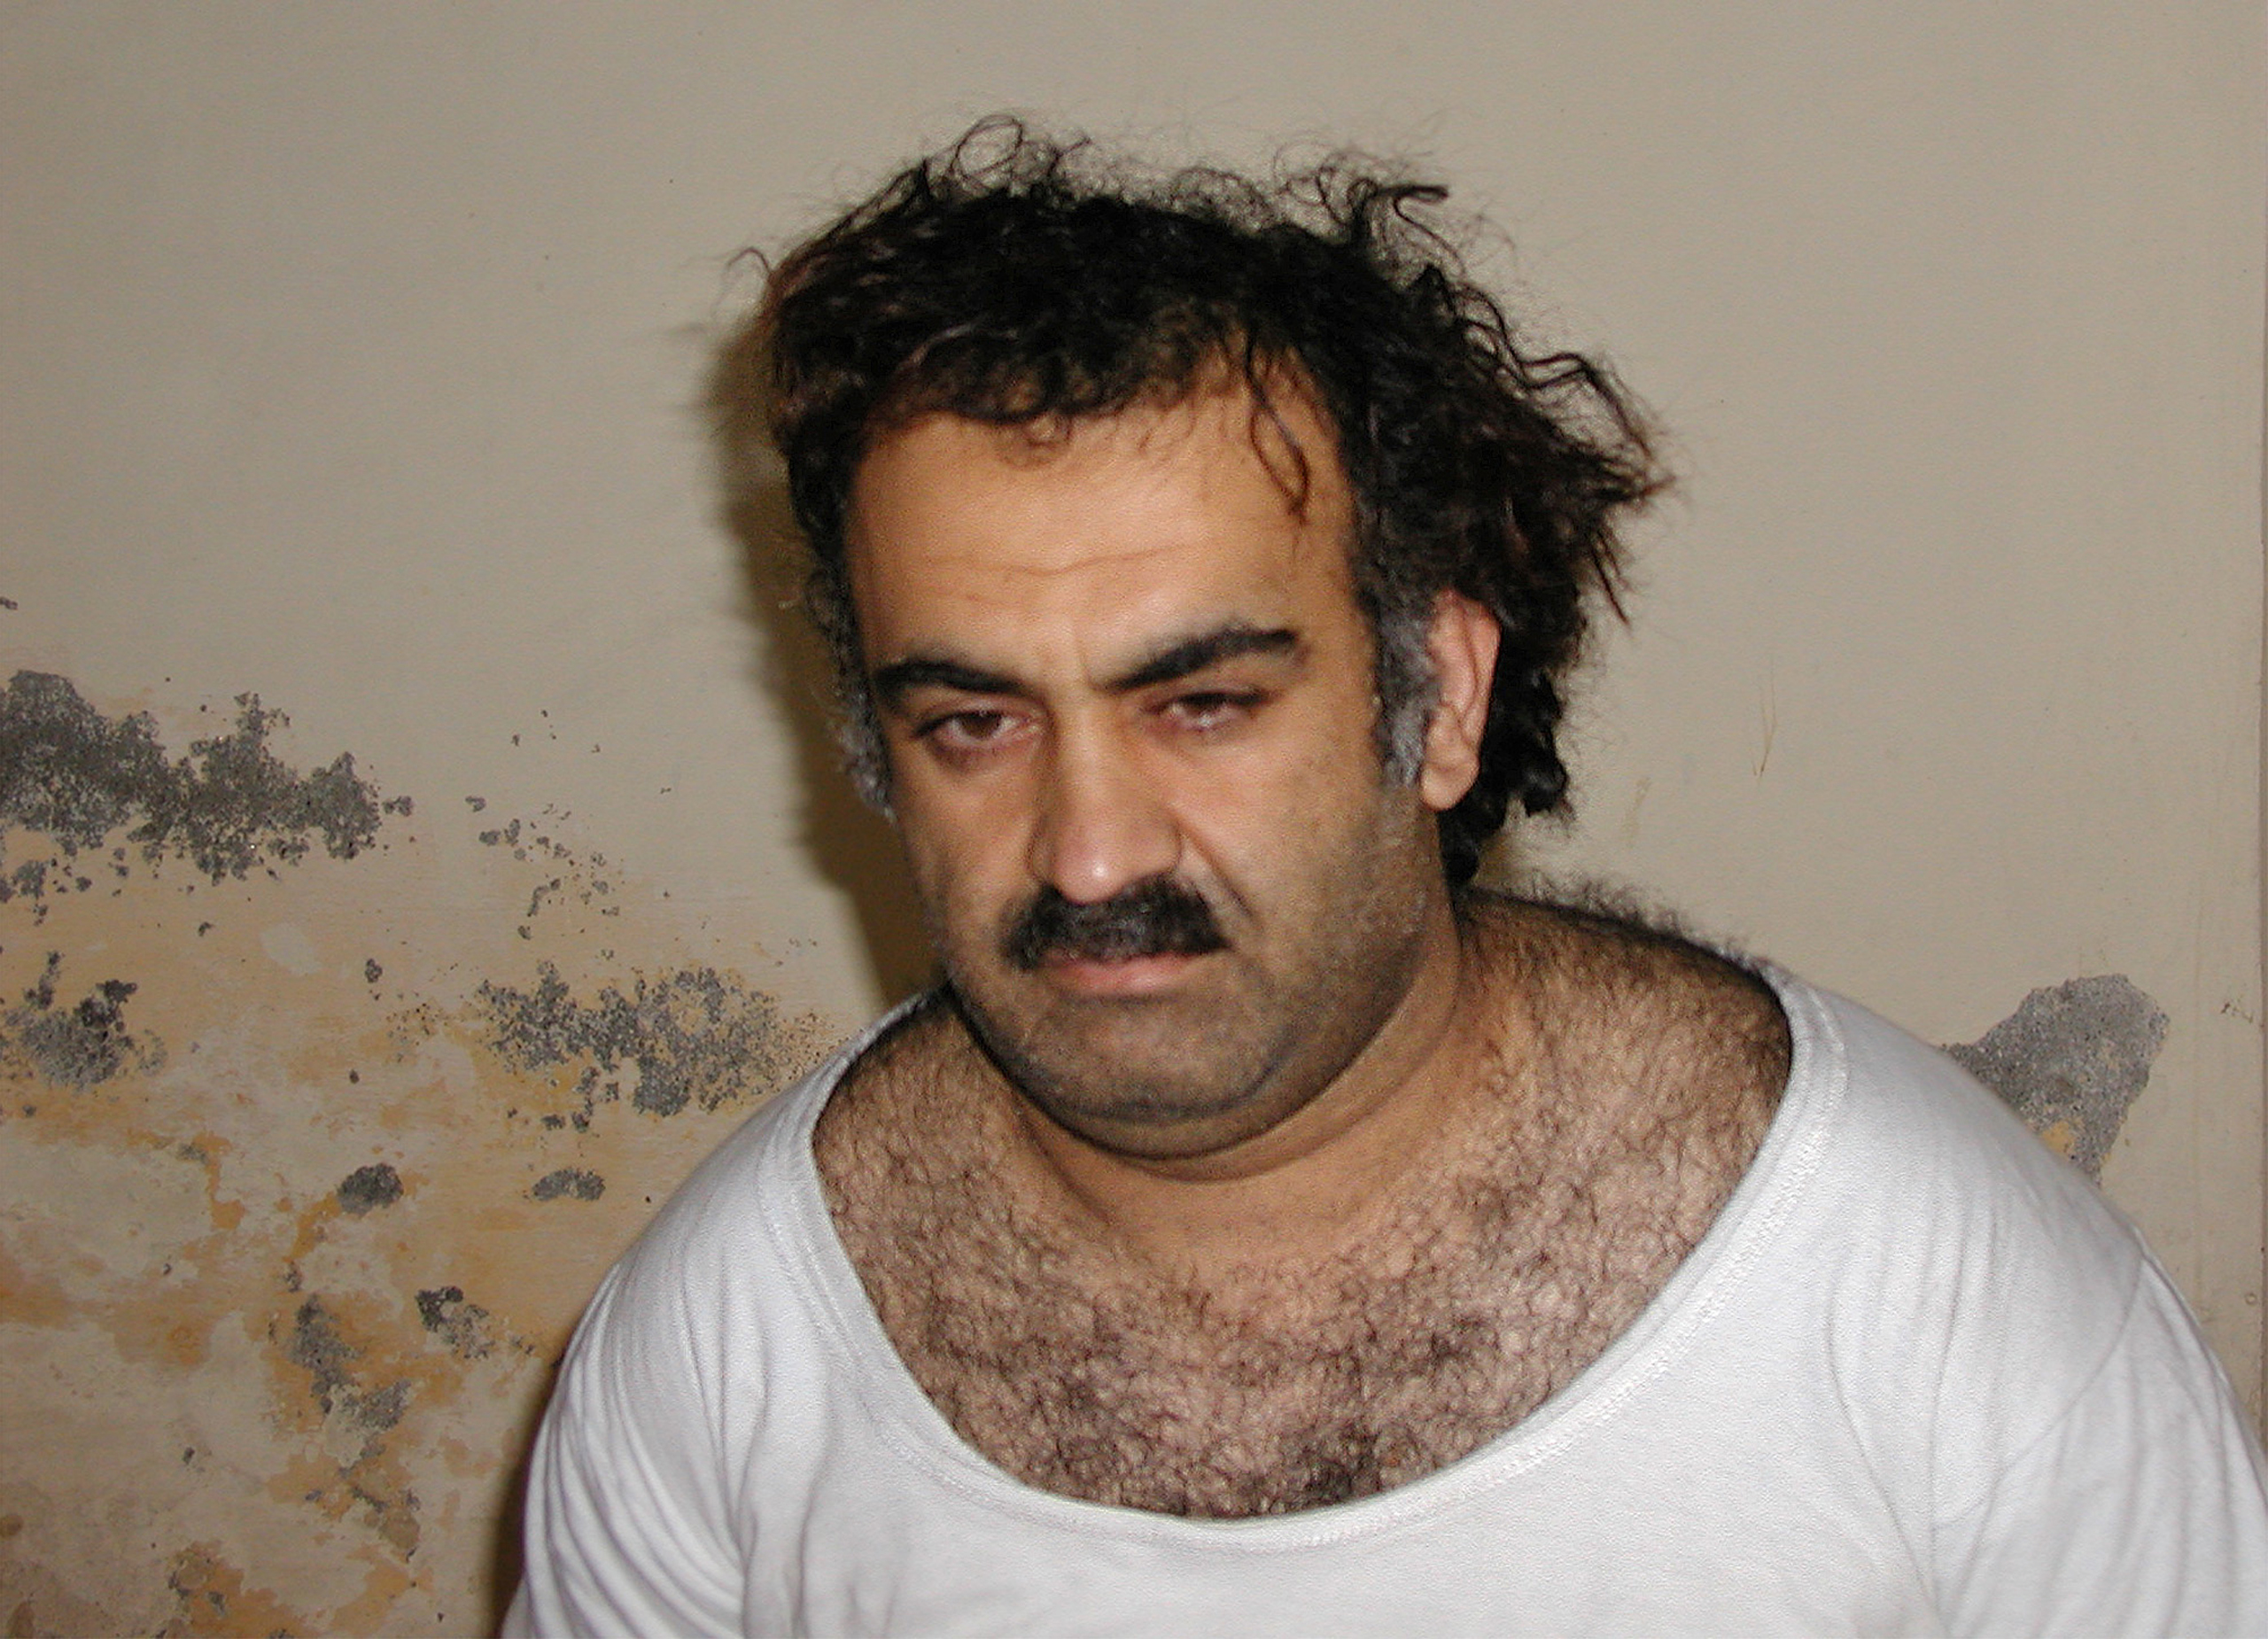 Khalid Sheikh Mohammed, al-Qaida's No.3, operational leader, and alleged September 11 2001 mastermind, is seen shortly after his CIA capture during a raid in Pakistan. (AP)